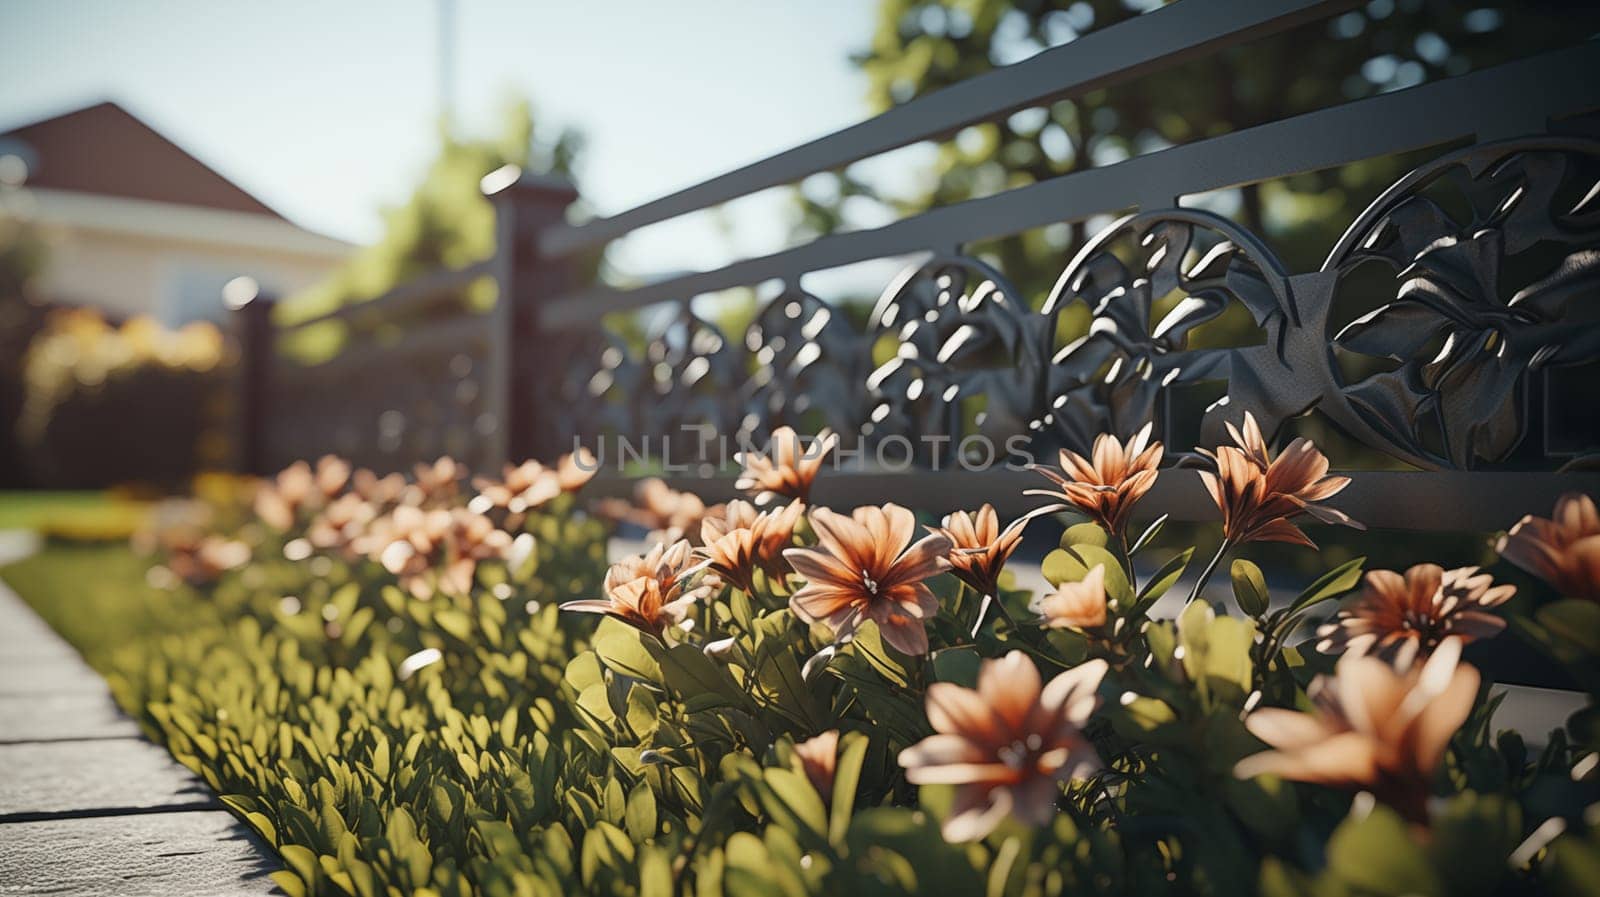 Ornate garden fence with a vibrant display of blooming flowers in a sunny suburban landscape.